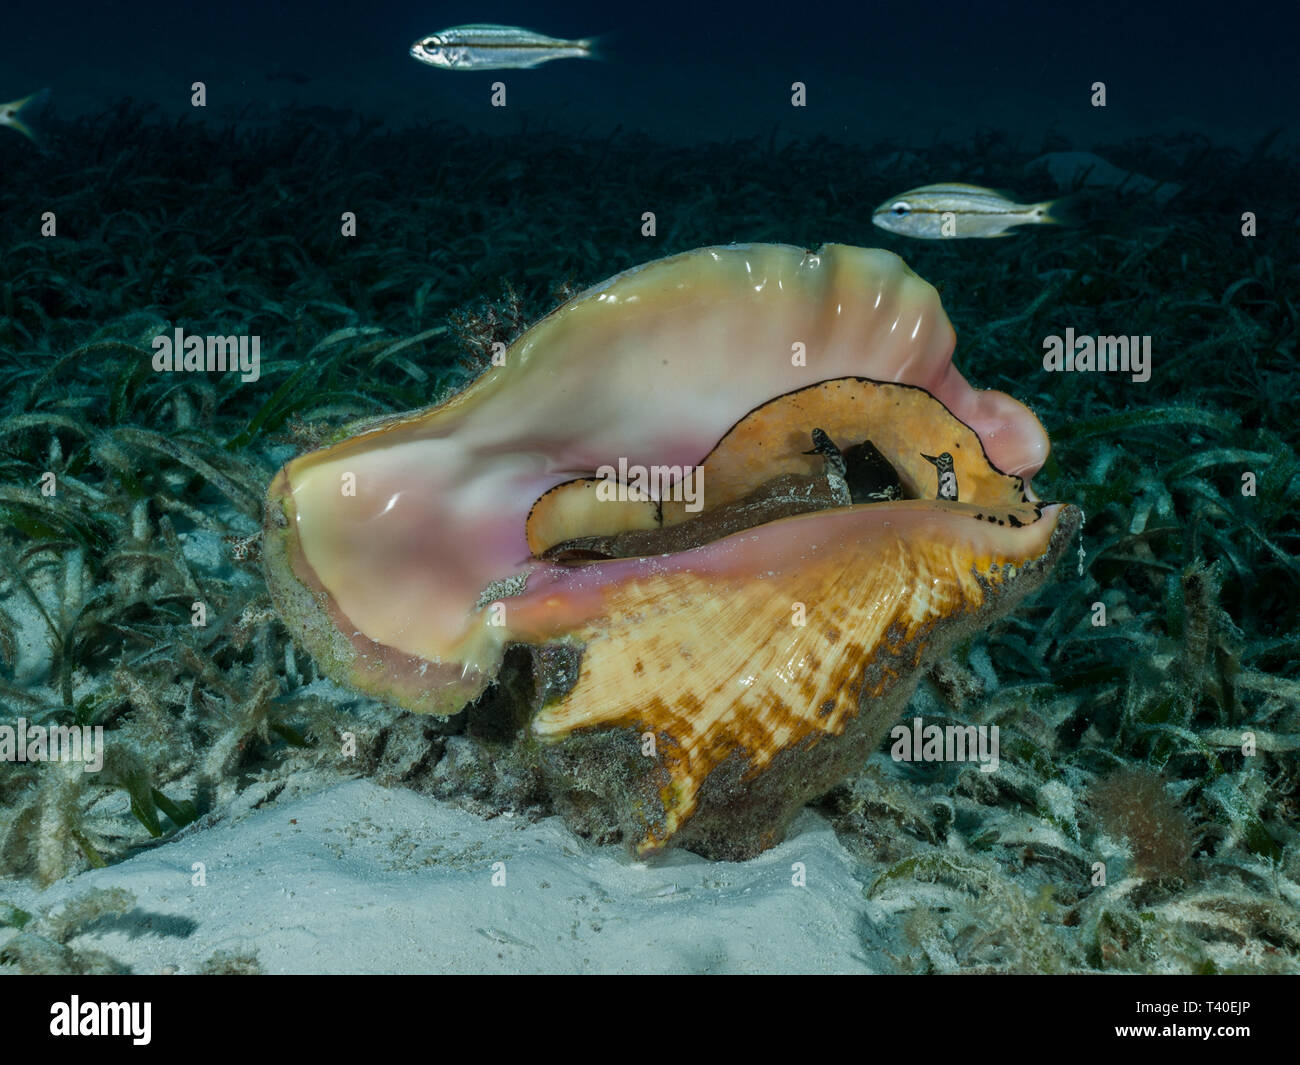 Queen conch an the seafloor with turtle grass. Stock Photo